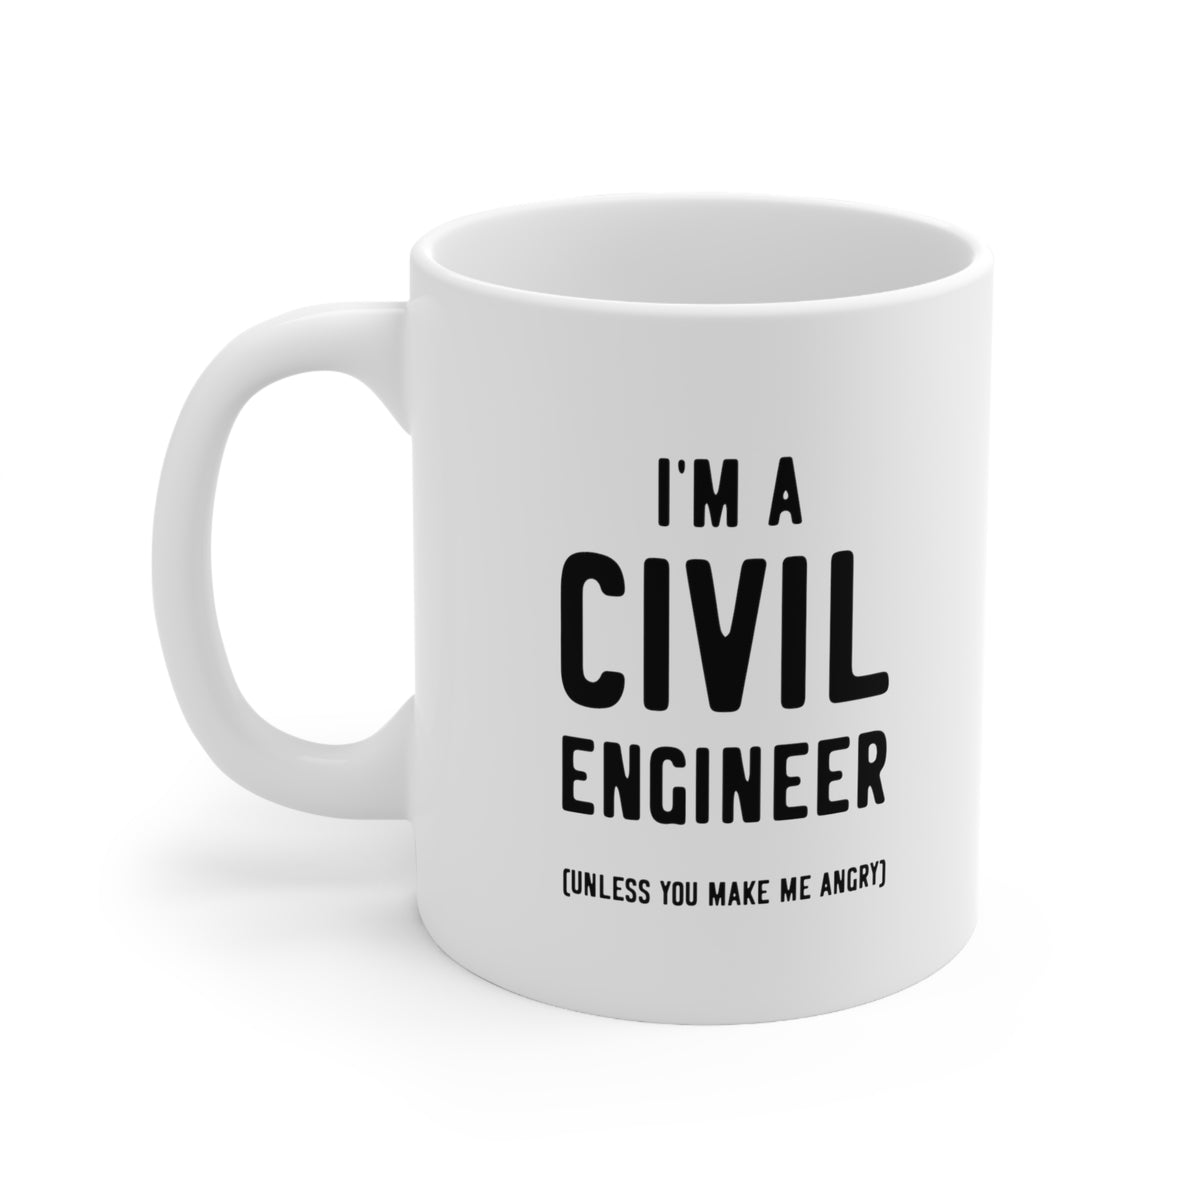 Engineer Coffee Mug - I'm a Civil Engineer (Unless you make me angry) Tumbler - Gifts For Computer Mechanical Electrical Engineering